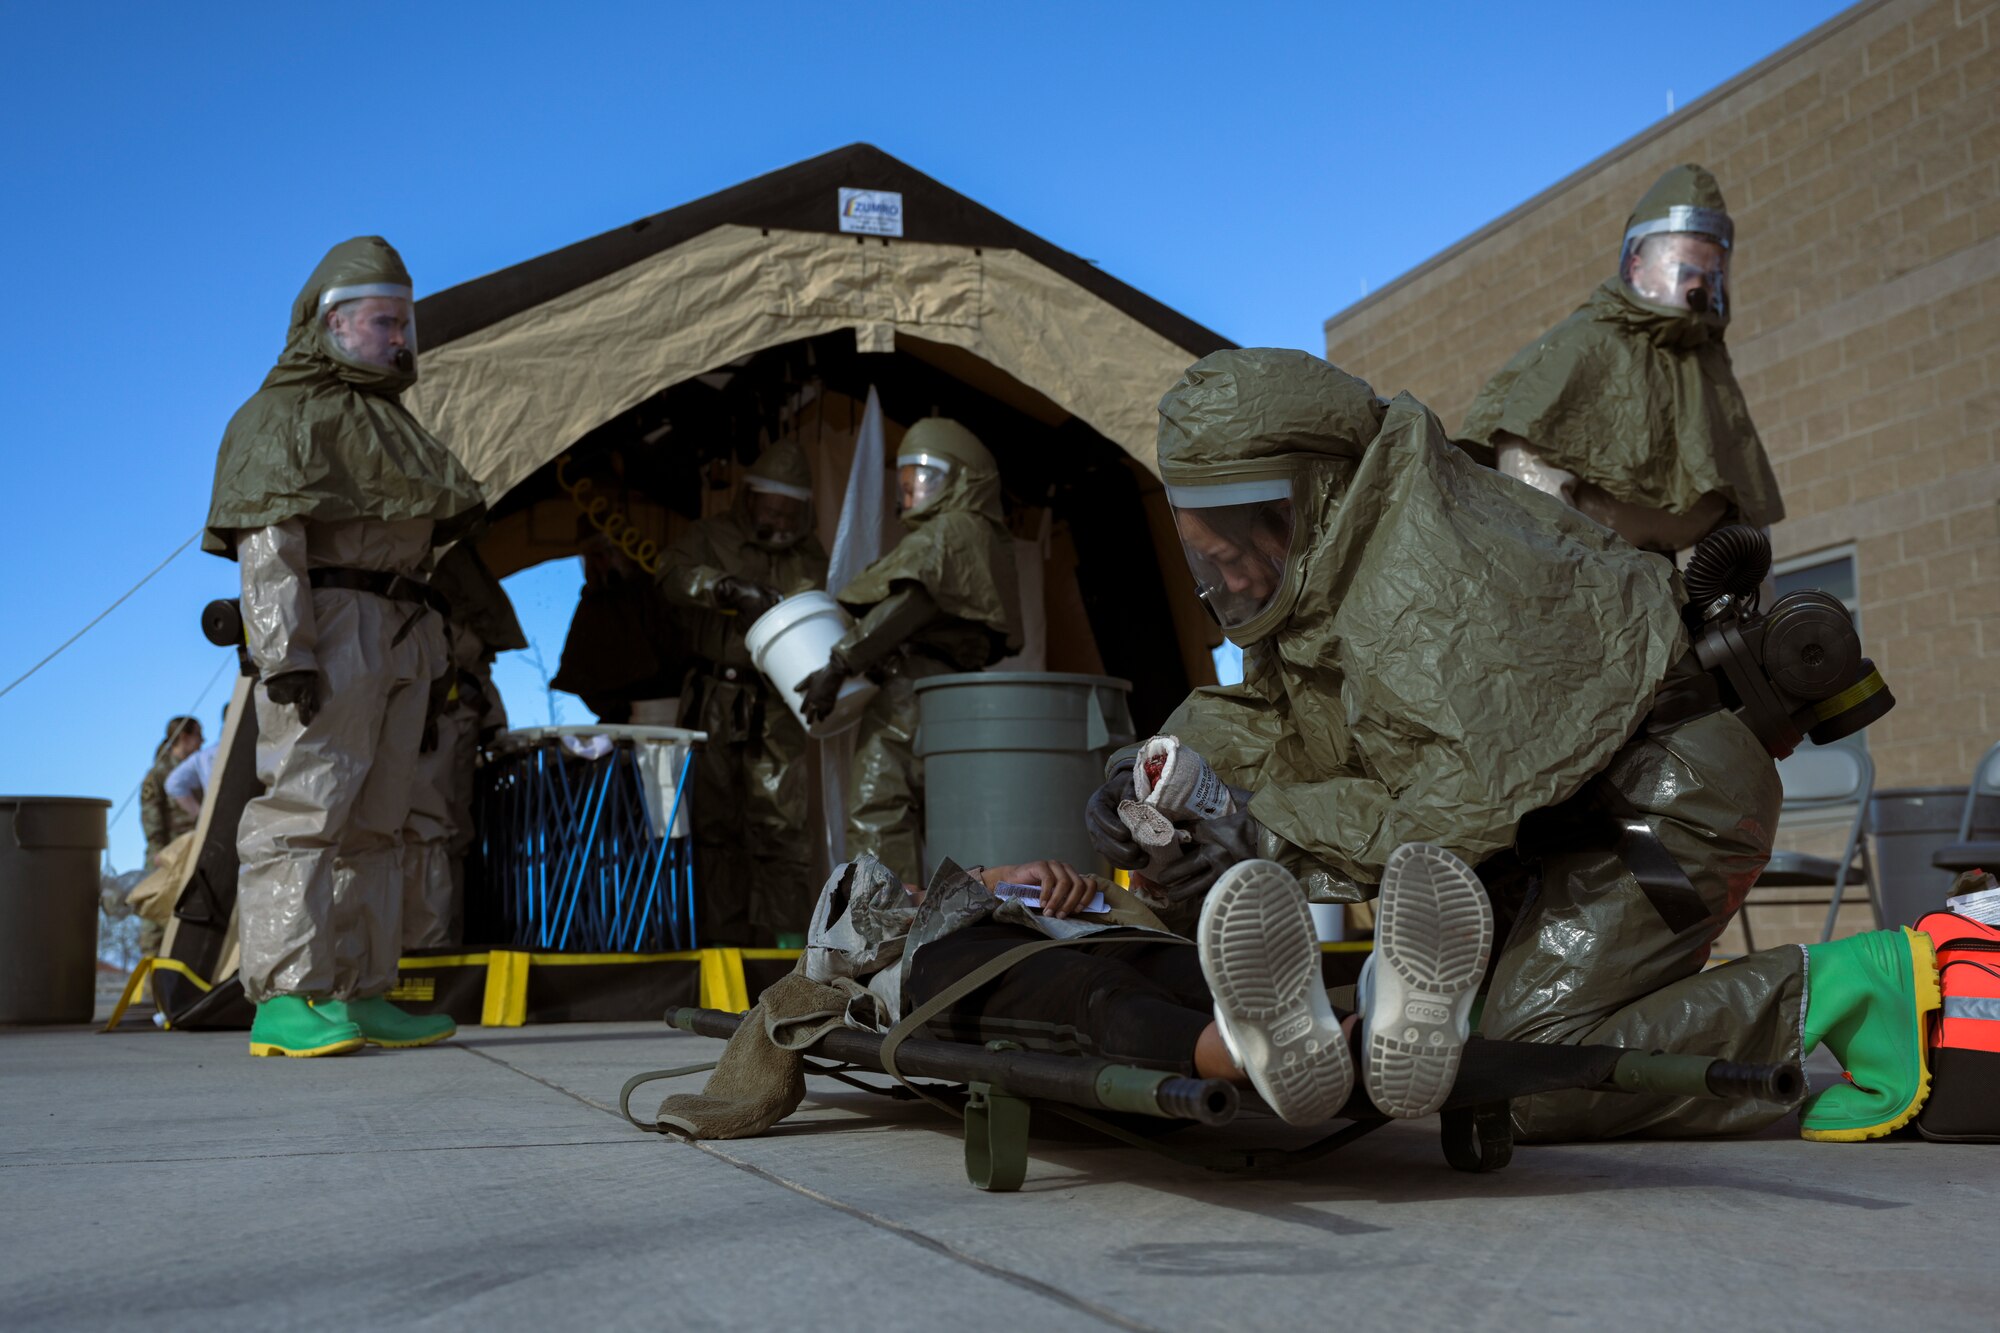 Members from the 49th Medical Group prepare a patient to be transported during a Ready Eagle exercise at Holloman Air Force Base, New Mexico, March 30, 2023. The initial response teams were responsible for on-the-scene care and patient transport. (U.S. Air Force by Senior Airman Antonio Salfran)